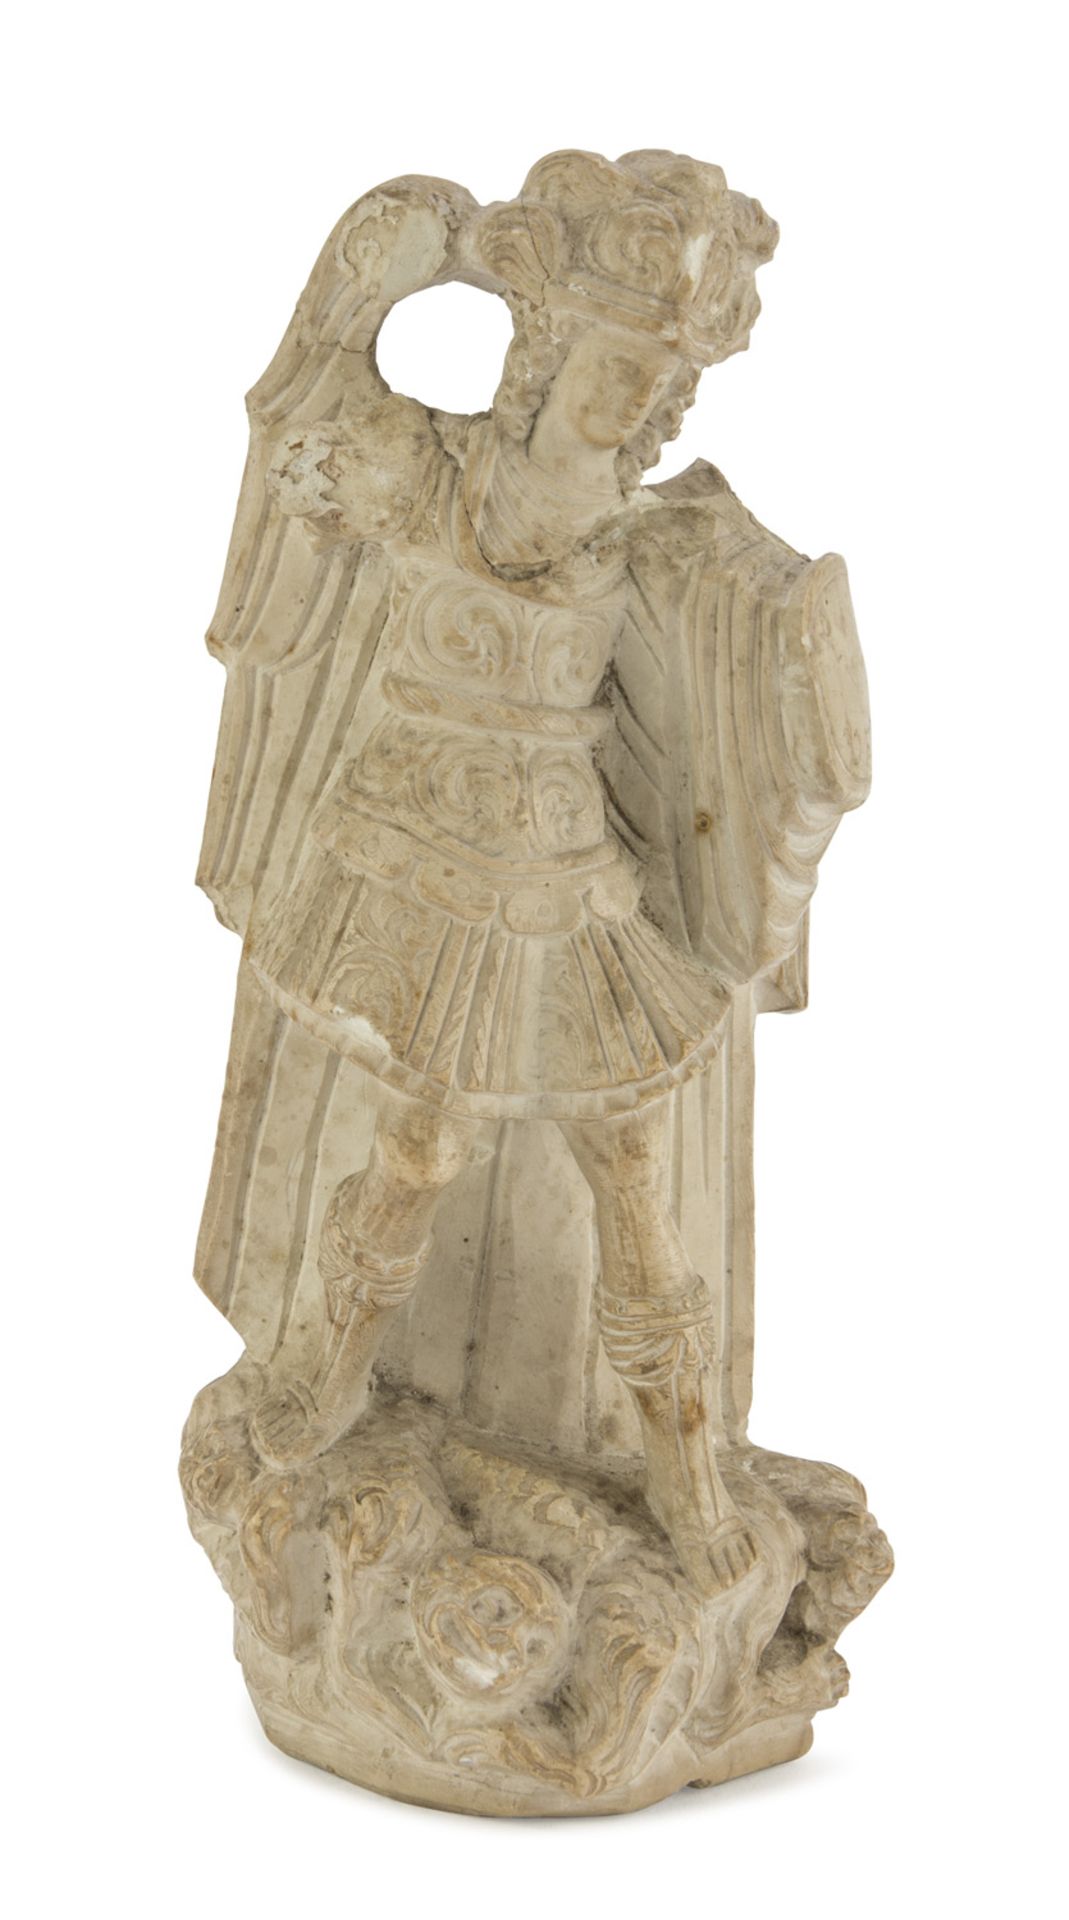 WHITE MARBLE SCULPTURE OF ST. GEORGE AND THE DRAGON, CENTRAL ITALY, 16TH CENTURY figure in pose with